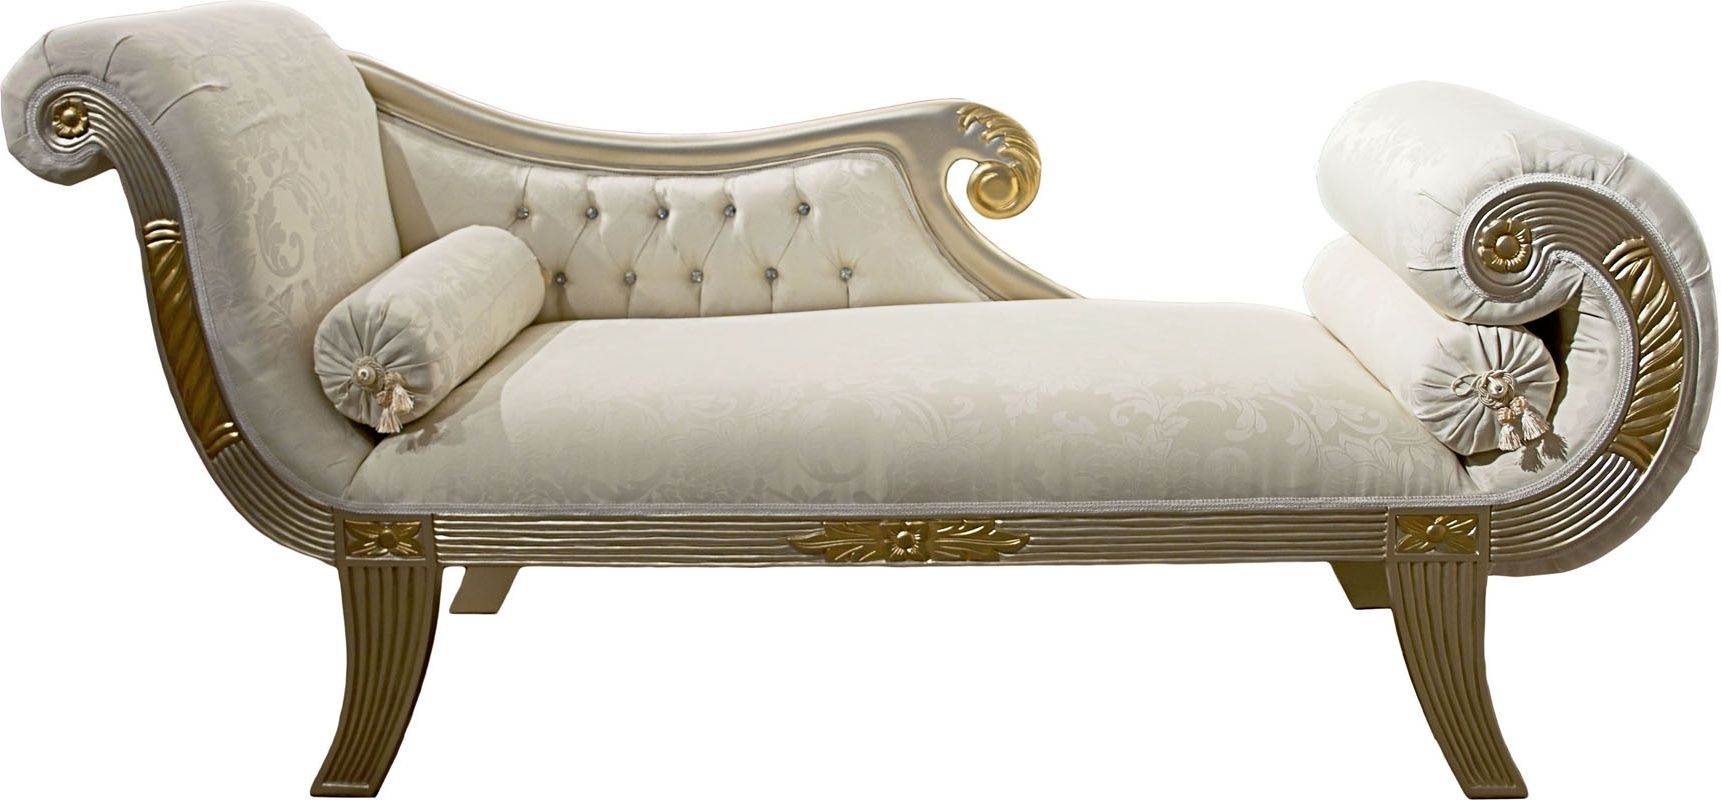 White Leather Vintage Chaise Lounge Chair In Victorian Style Plus Throughout Fashionable Antique Chaise Lounge Chairs (View 11 of 15)